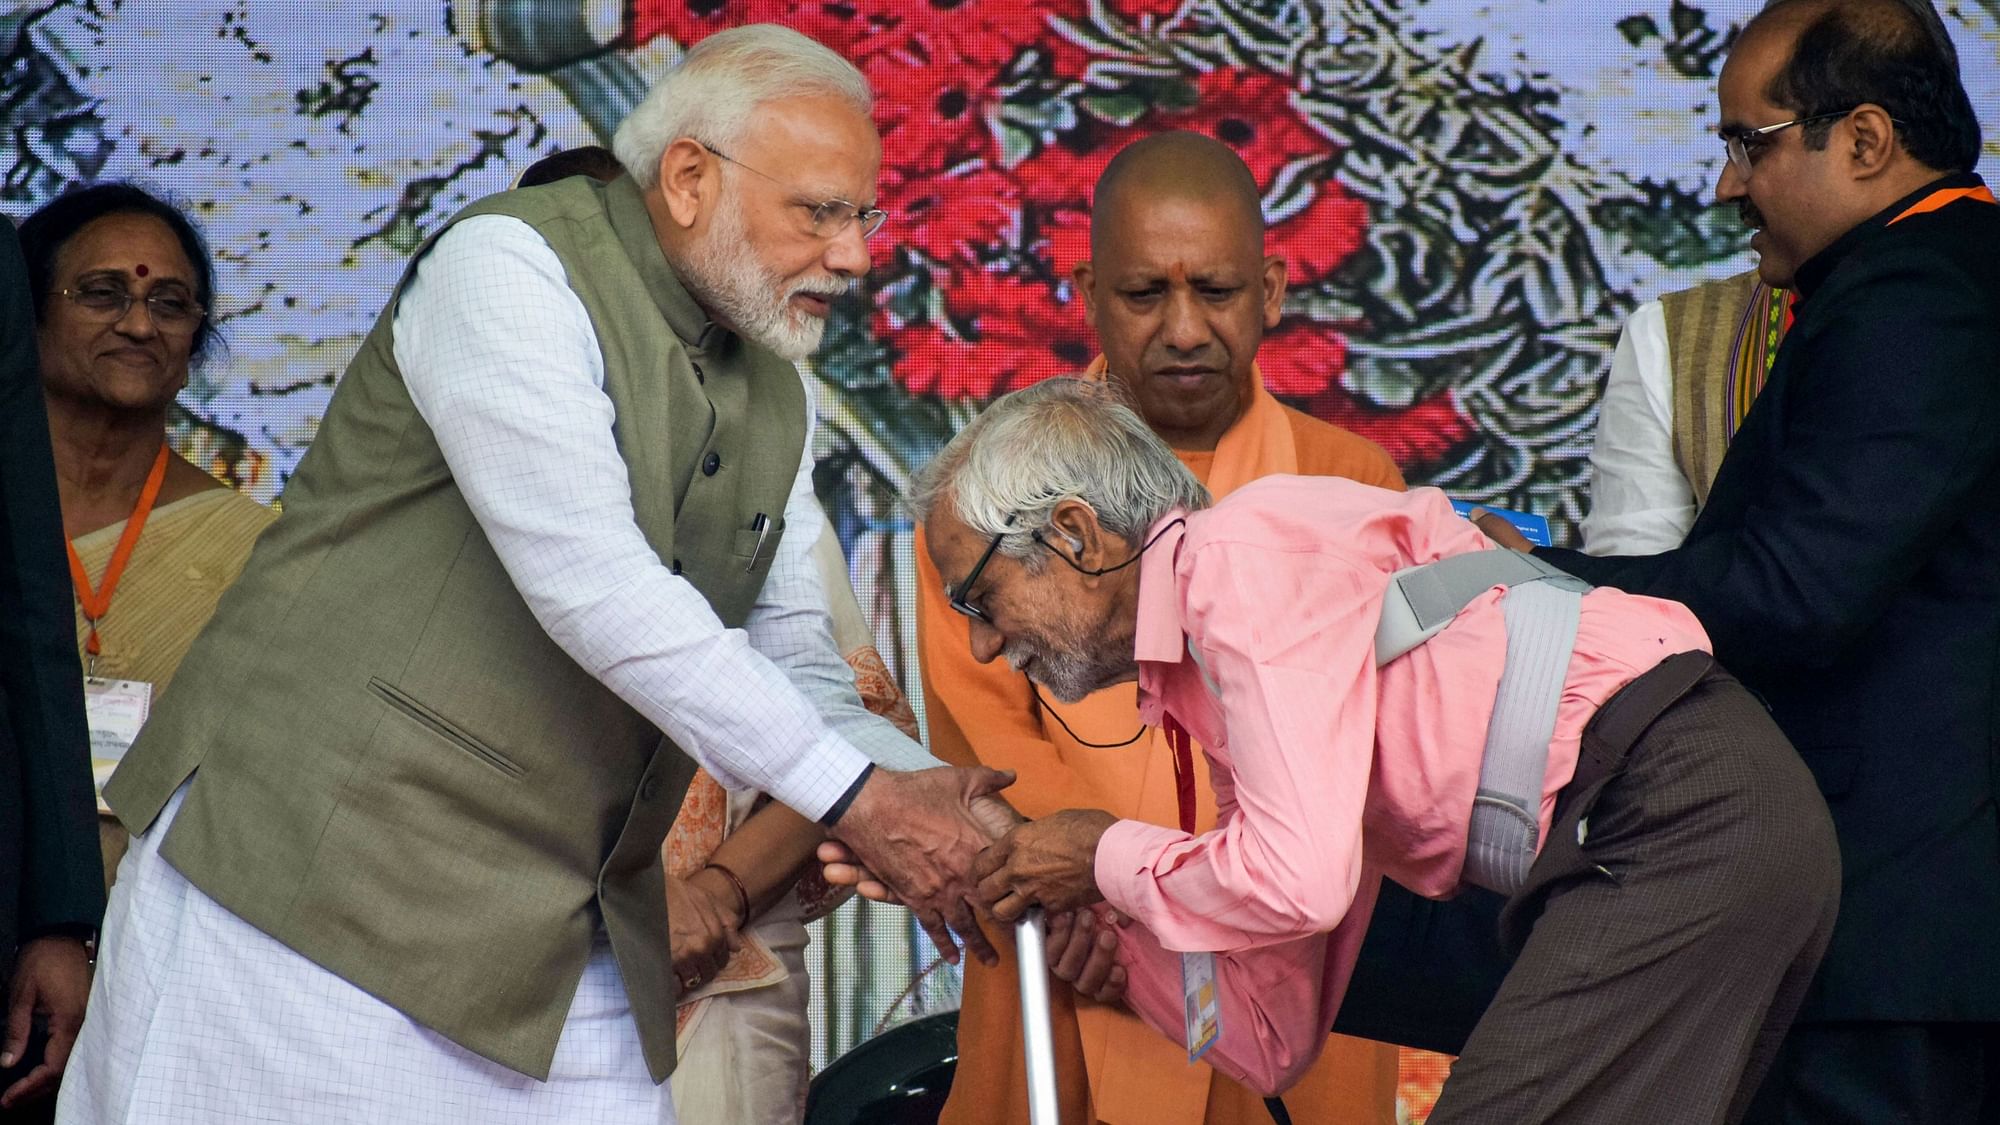  Prime Minister Narendra Modi distributes an assistive device to a differently-abled man during a programme in Prayagraj on 29 February.